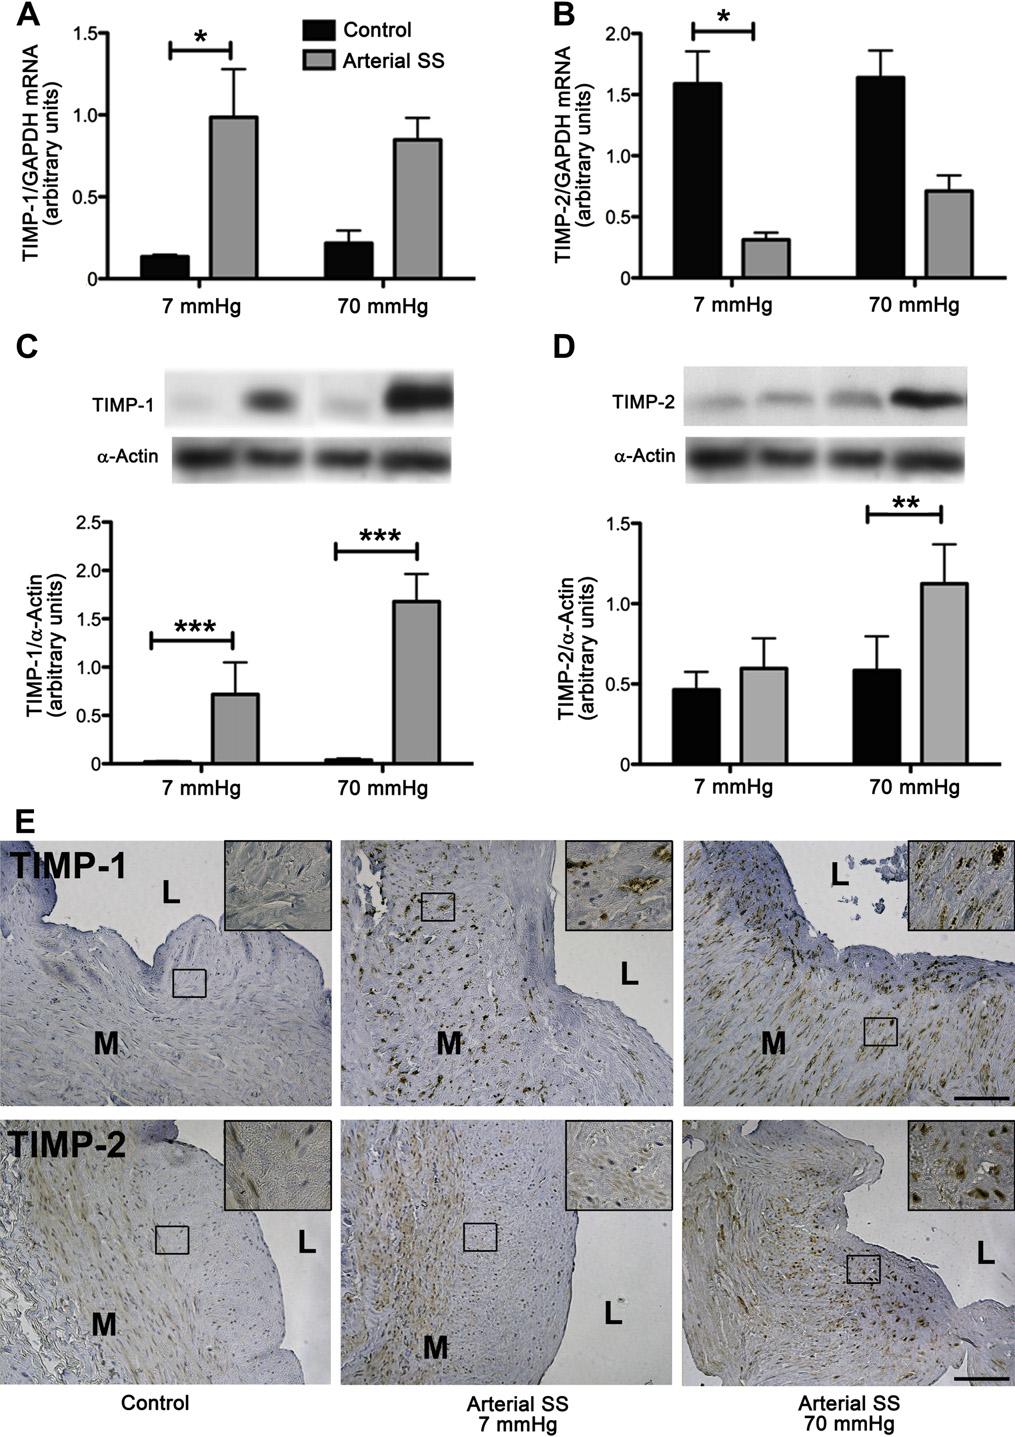 1378 Berard et al May 2013 Fig 5. The inhibitors of tissue inhibitor of metalloproteinase (TIMP)-1 and TIMP-2 are differentially affected by arterial shear stress (SS) and pressure.